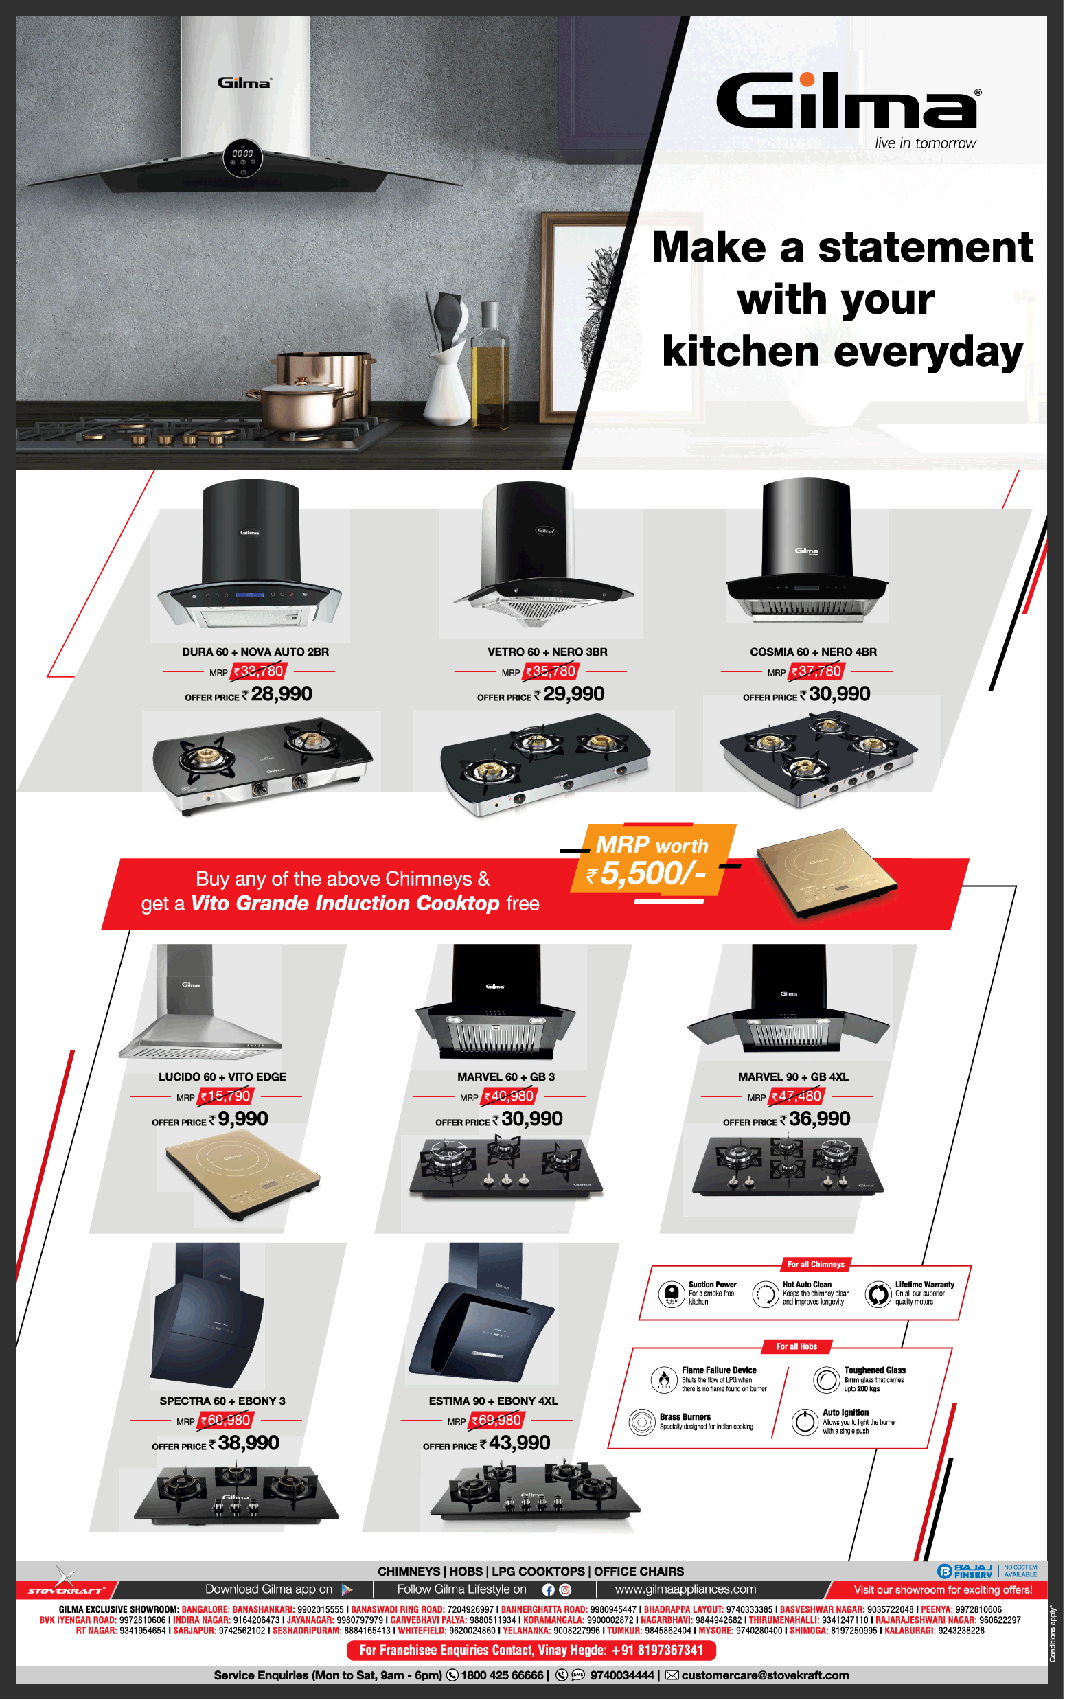 gilma-home-appliances-make-a-statement-with-your-kitchen-everyday-ad-times-of-india-bangalore-08-02-2019.png